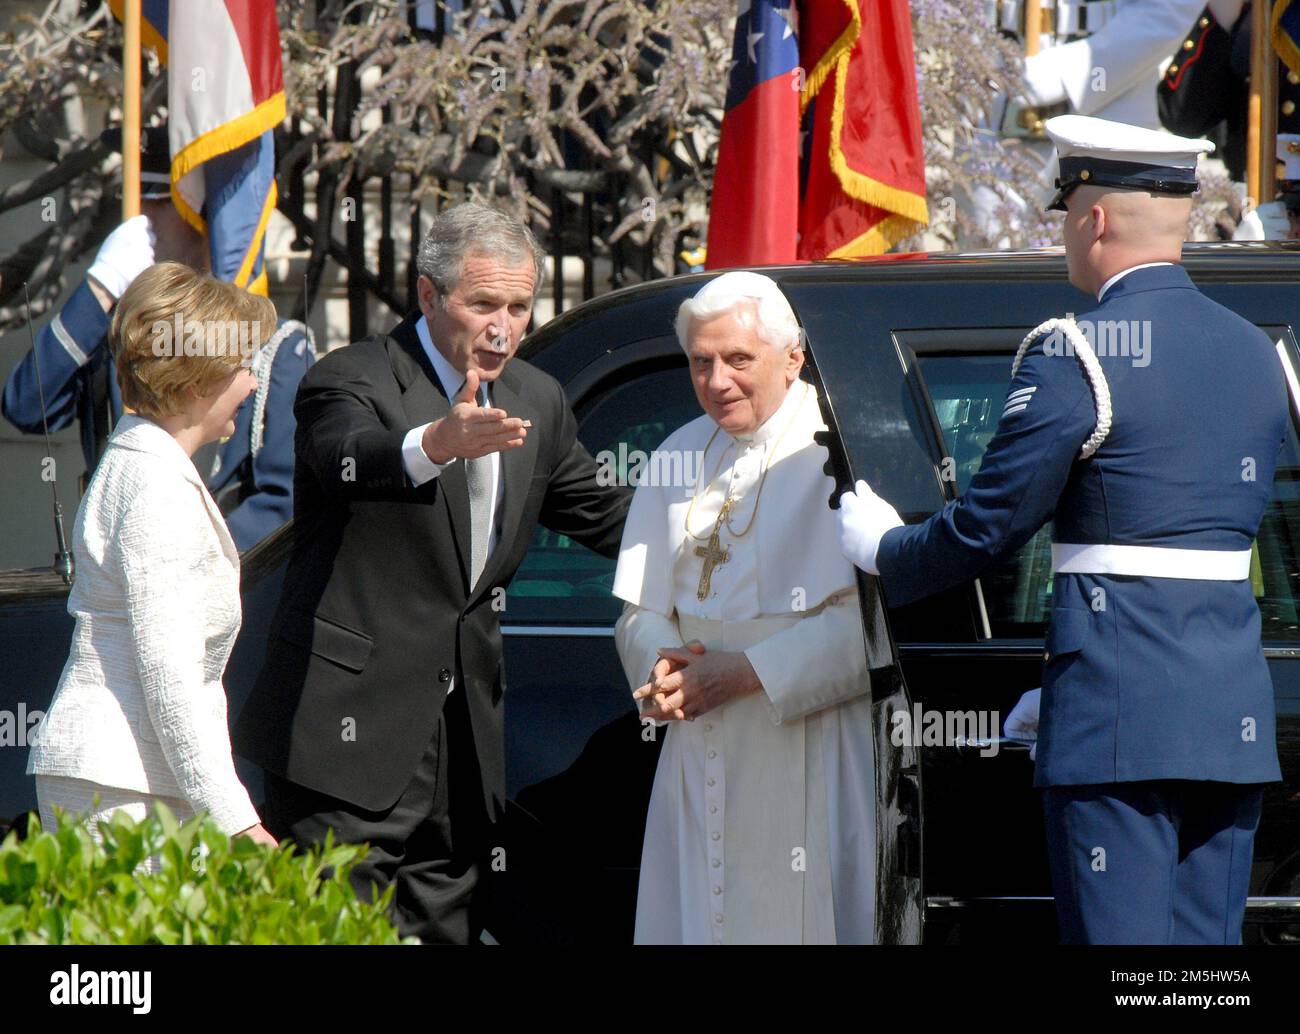 Washington, United States Of America. 16th Apr, 2008. United States President George W. Bush, center invites Pope Benedict XVI, right, towards the podium as he arrives at the White House in Washington, DC on Wednesday, April 16, 2008. First lady Laura Bush is at far left. Credit: Ron Sachs/CNP/Sipa USA.(RESTRICTION: NO New York or New Jersey Newspapers or newspapers within a 75 mile radius of New York City) Credit: Sipa USA/Alamy Live News Stock Photo